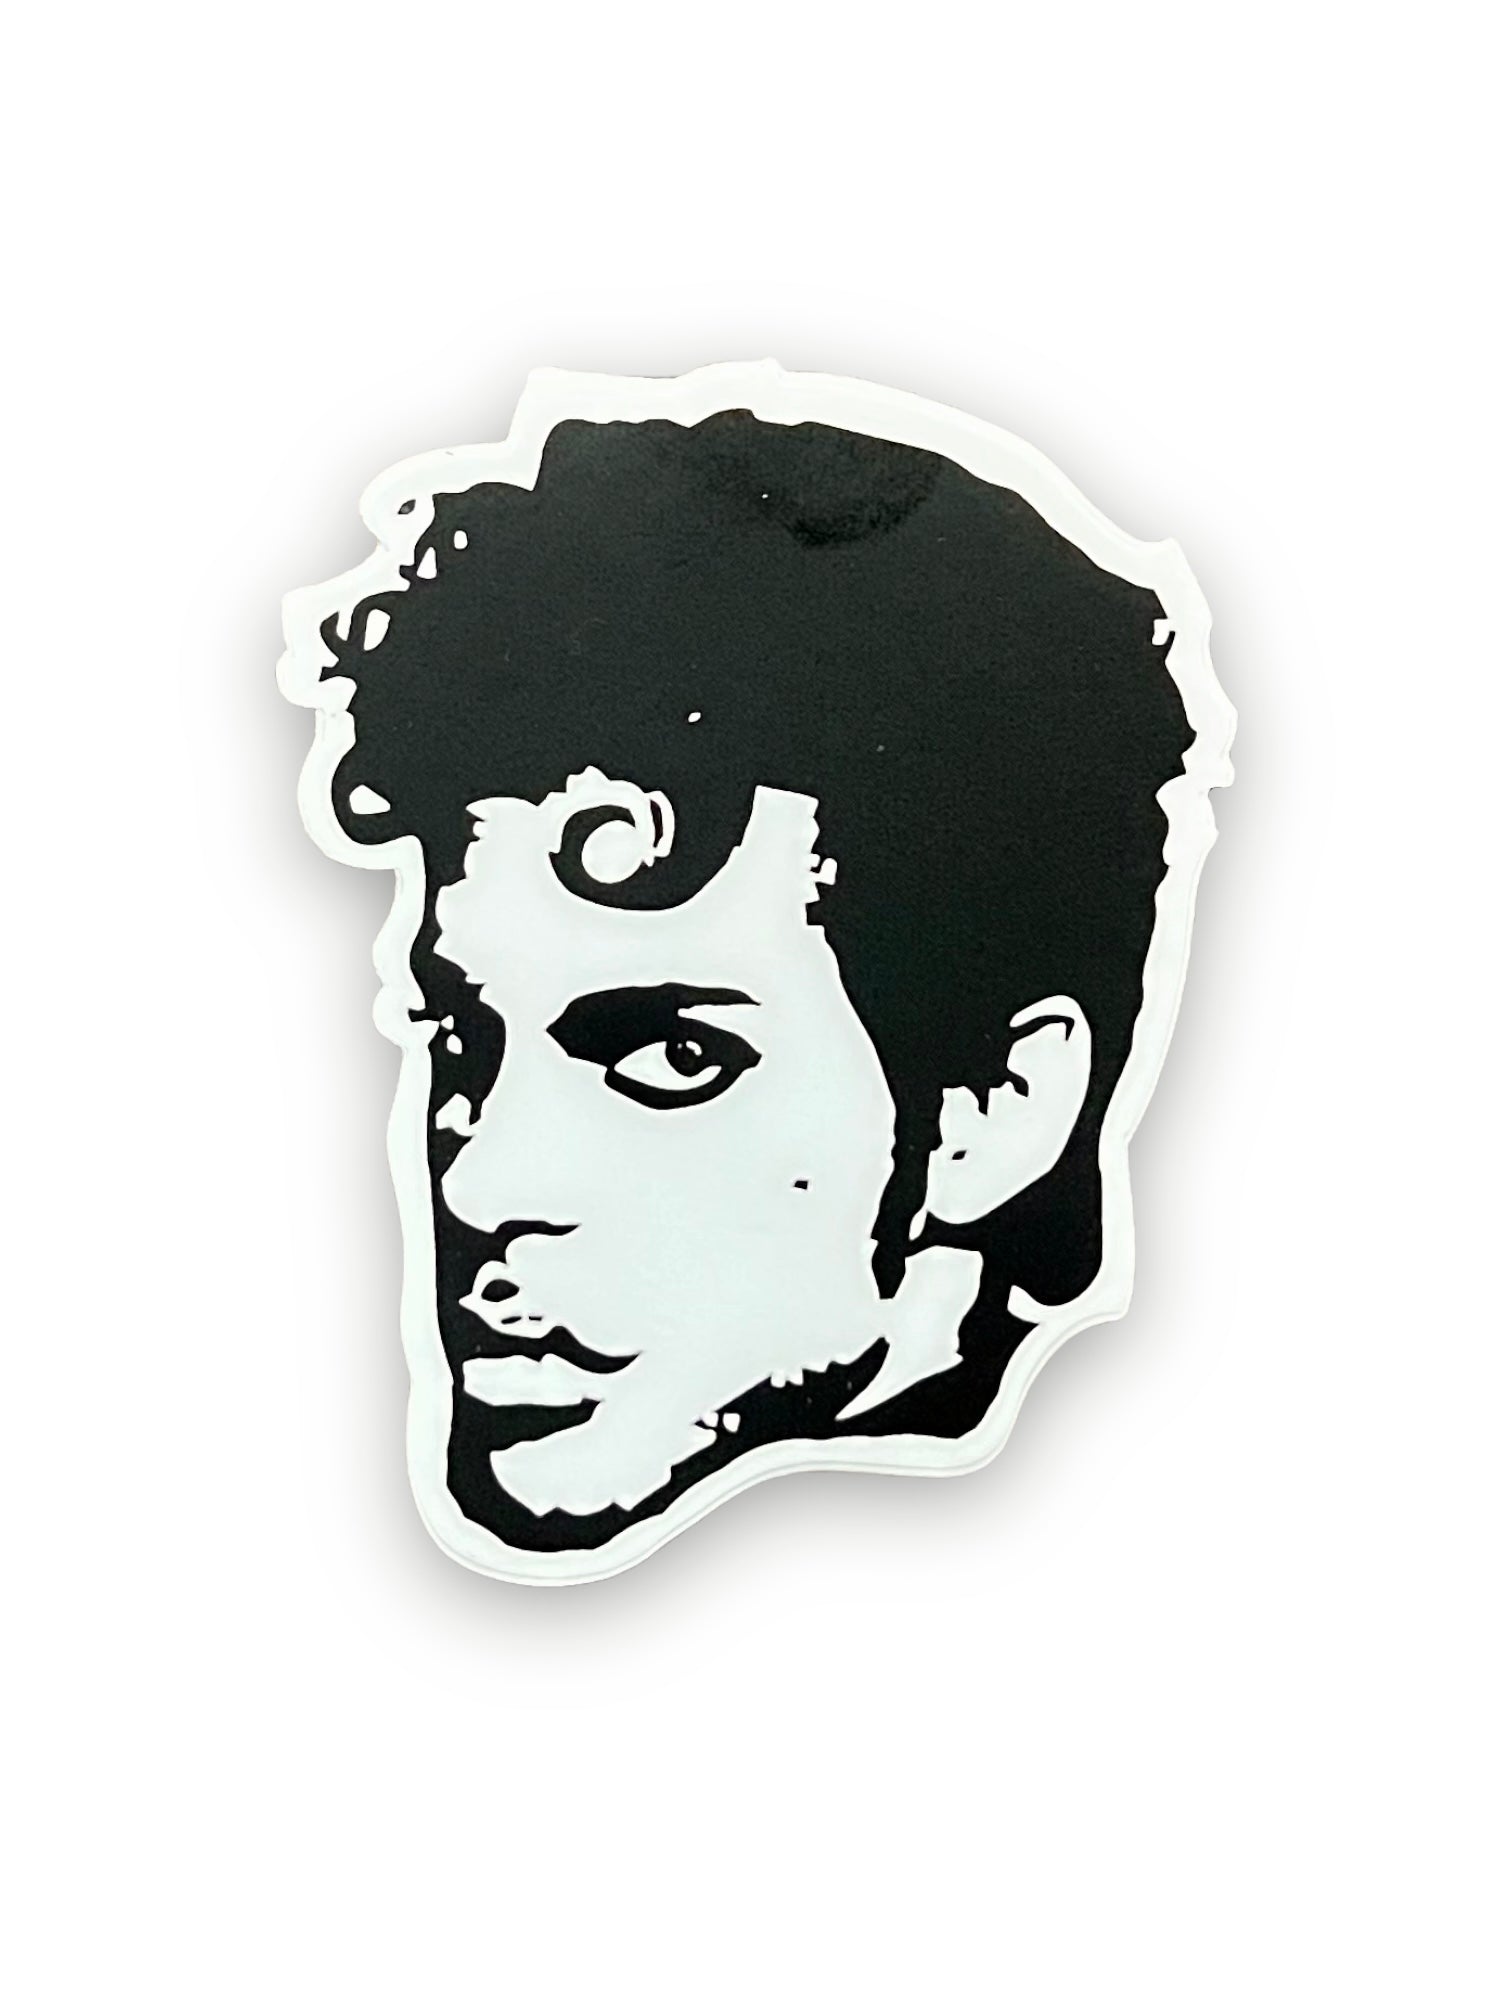 Prince waterproof, graphic sticker, by lettercraft Sold at Le Monkey House